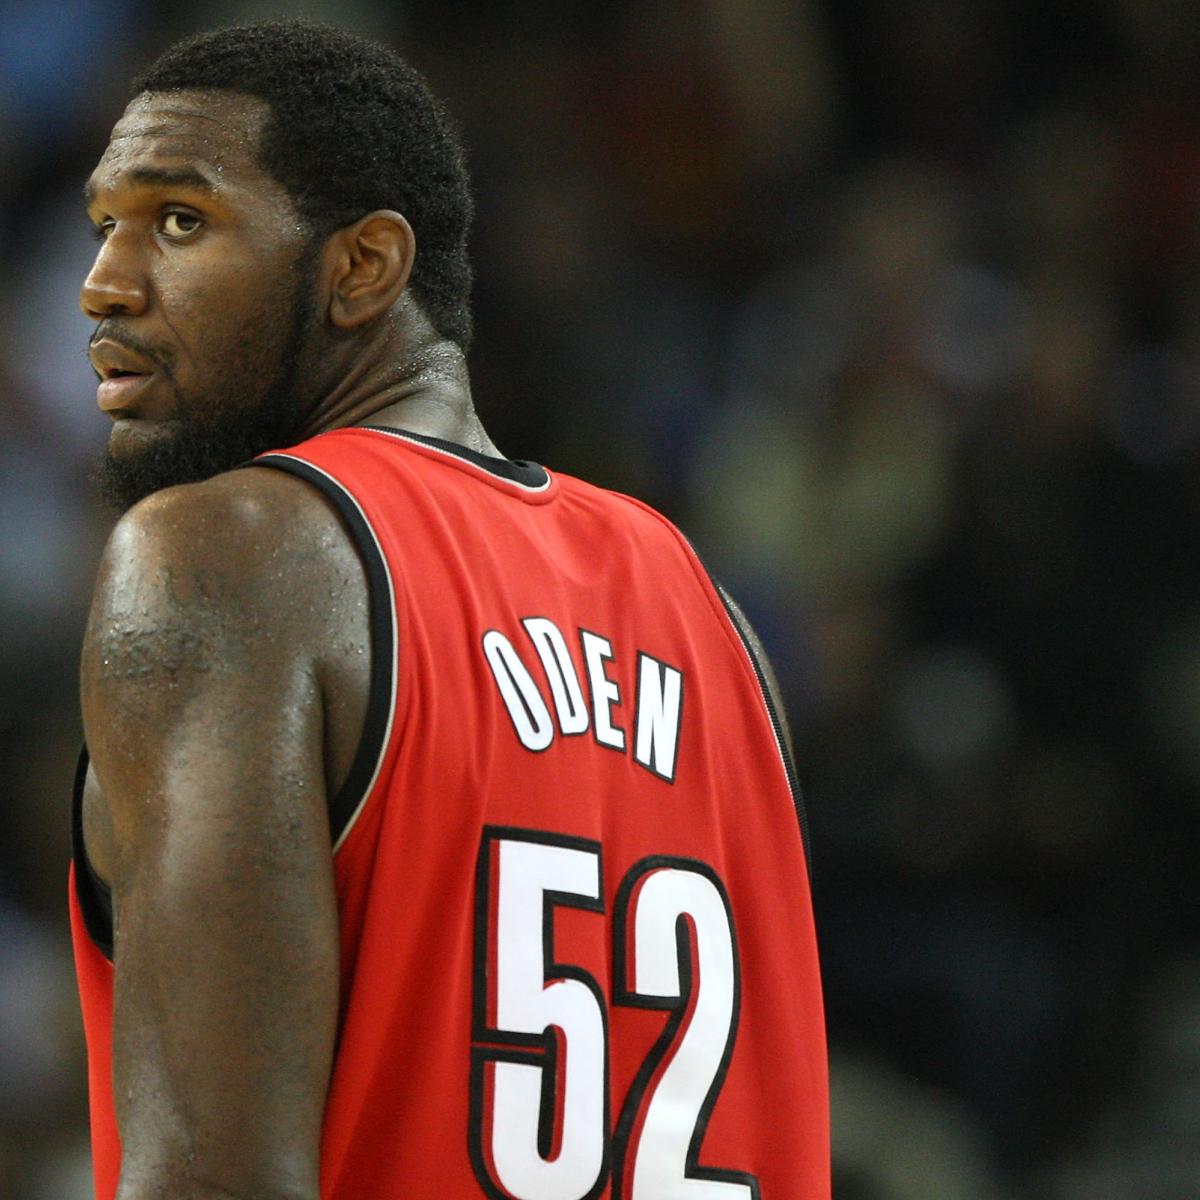 Greg Oden says he'll be remembered as NBA's “biggest bust” – The Denver Post